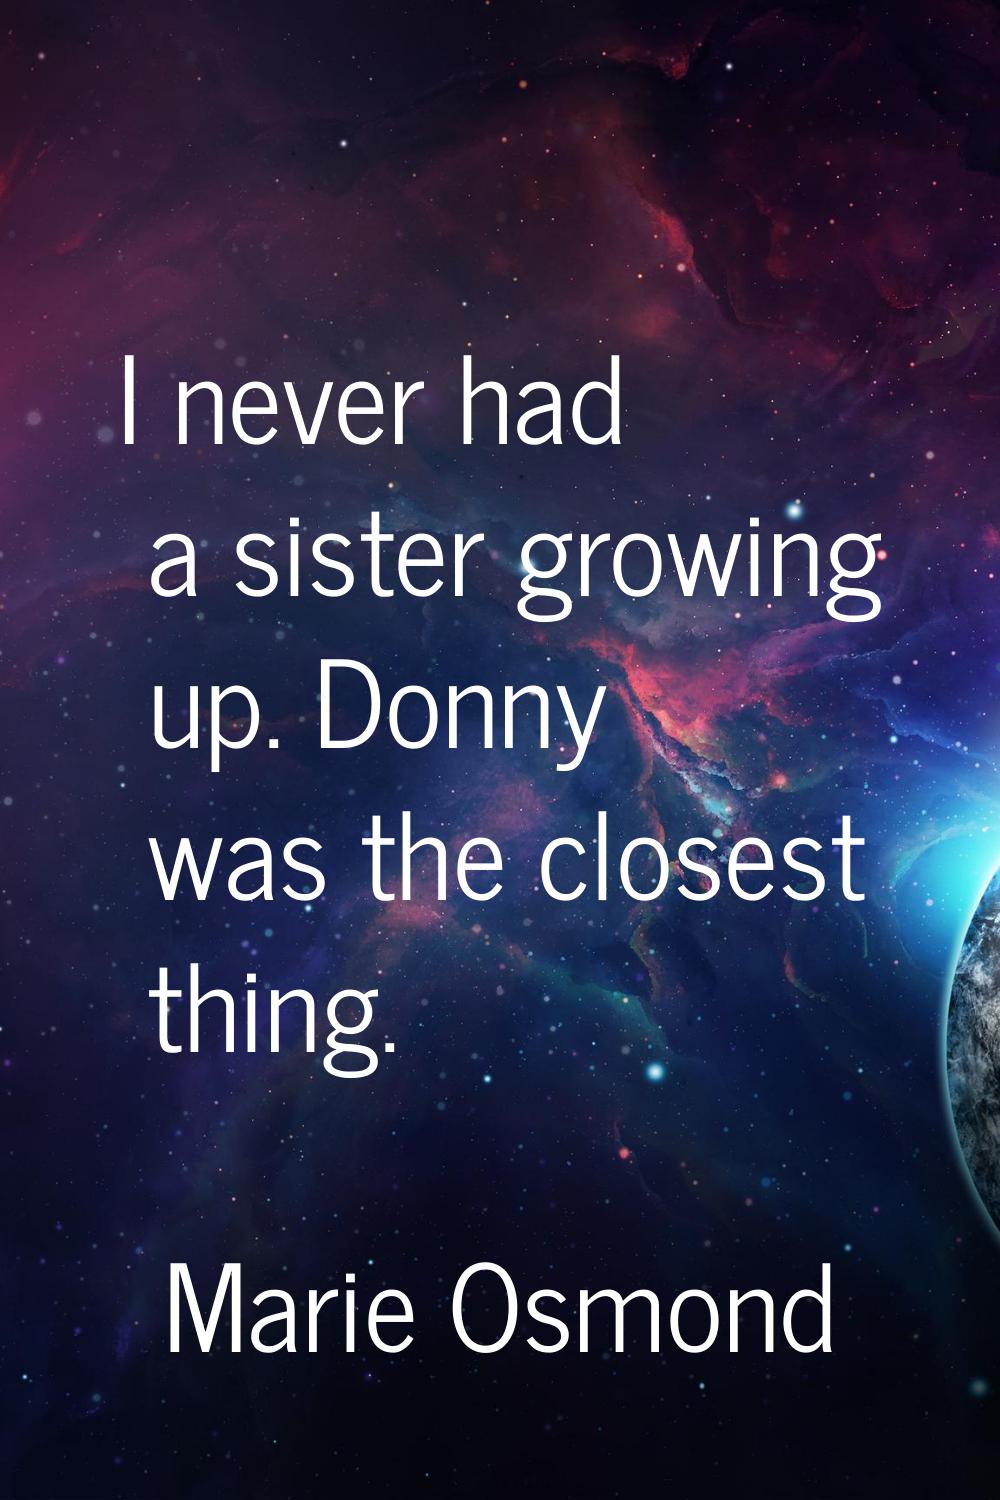 I never had a sister growing up. Donny was the closest thing.